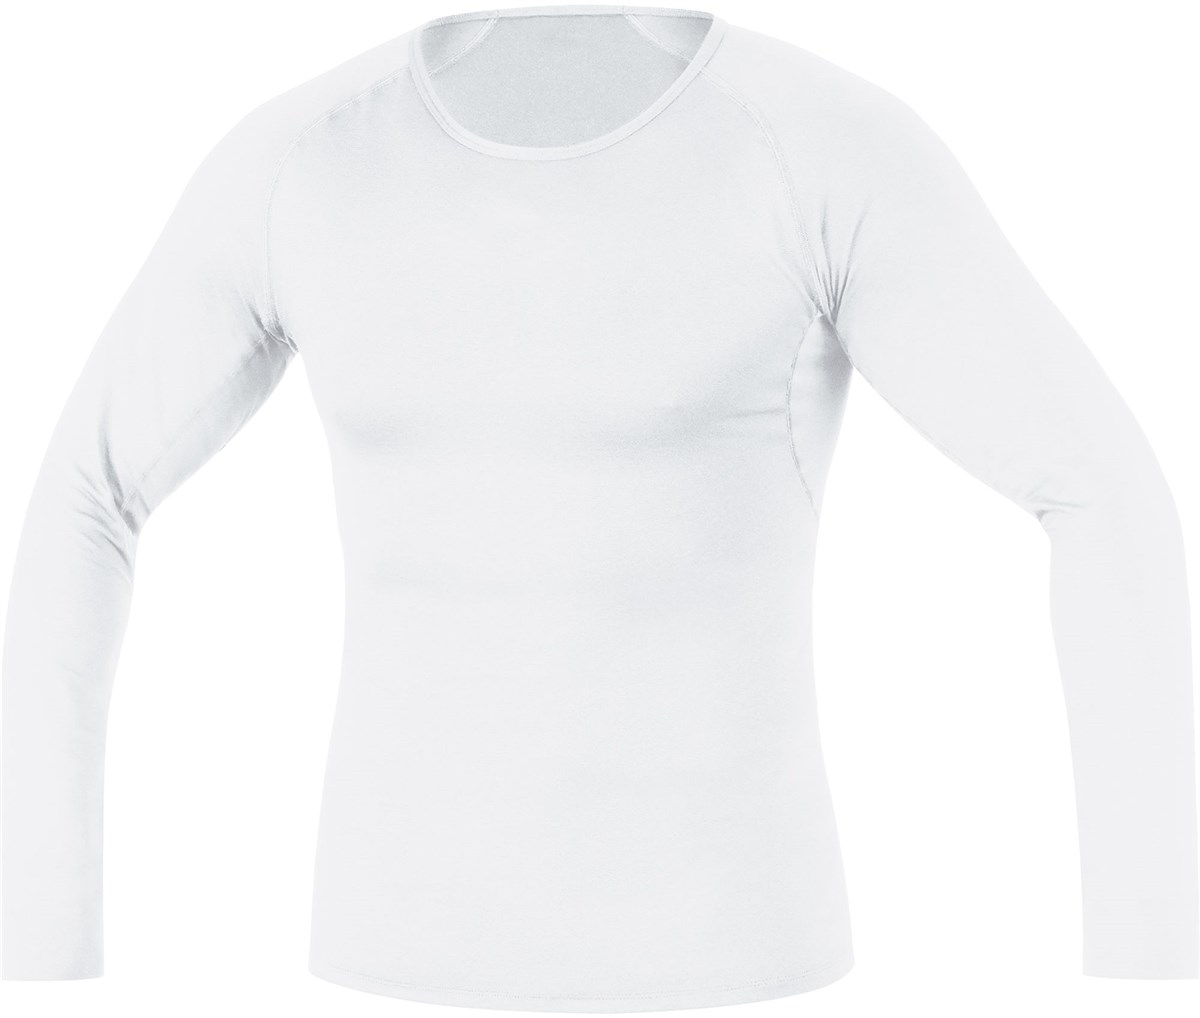 Gore Base Layer Thermo Shirt Long AW17 product image